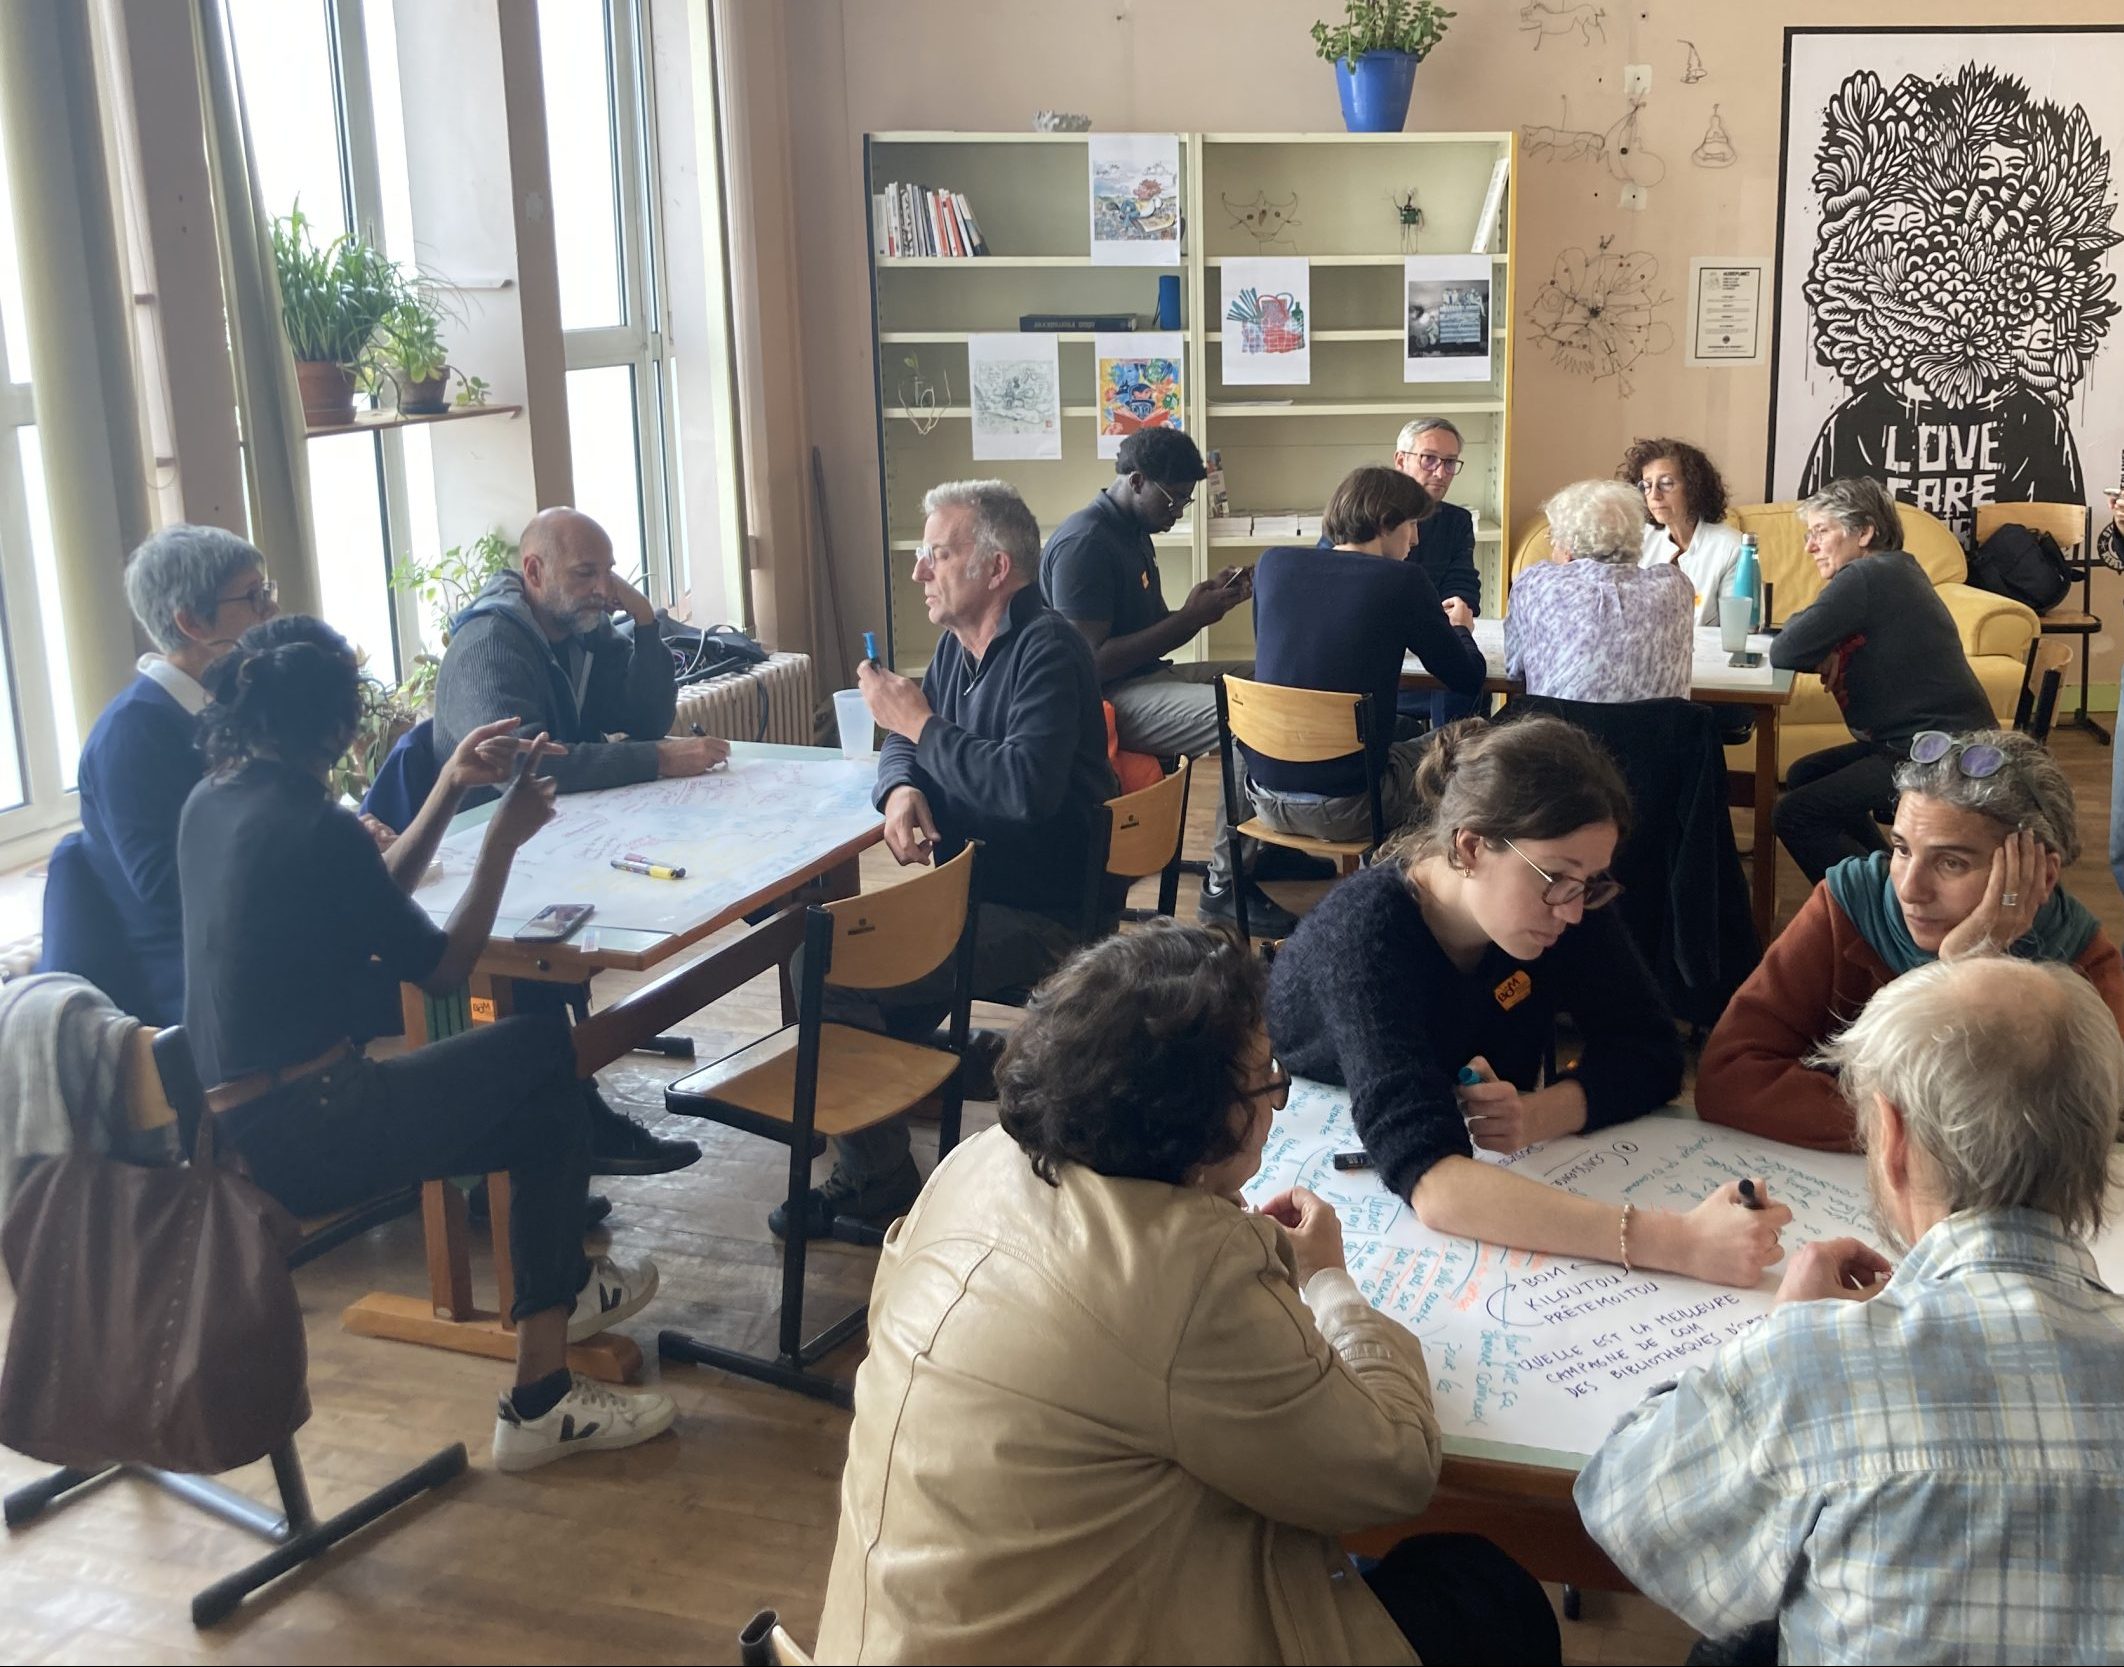 La BOM staff, volunteers, and members participating in a workshop to identify how to better engage and serve the residents of Montreuil. Credit: Shareable